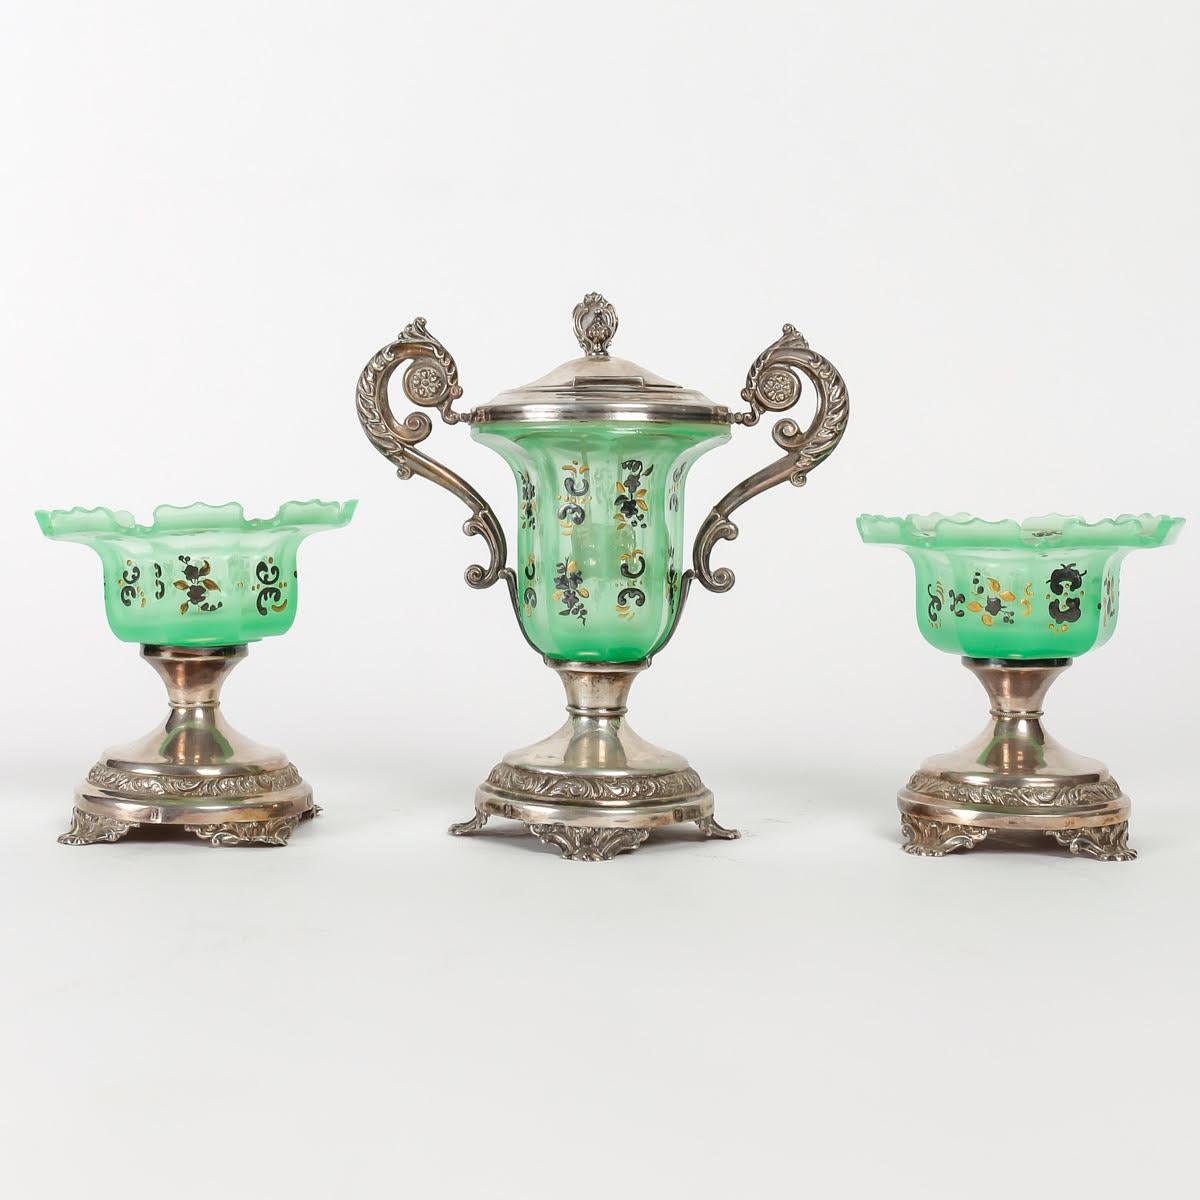 Confiturier and its two jam display stands, Antique Charles X period.

Enameled green opaline confiturier on silver base, stamped with Minerve, with its two opaline and silver jam display stands, 1830, Charles X period antiques.

Dimensions:

Jam